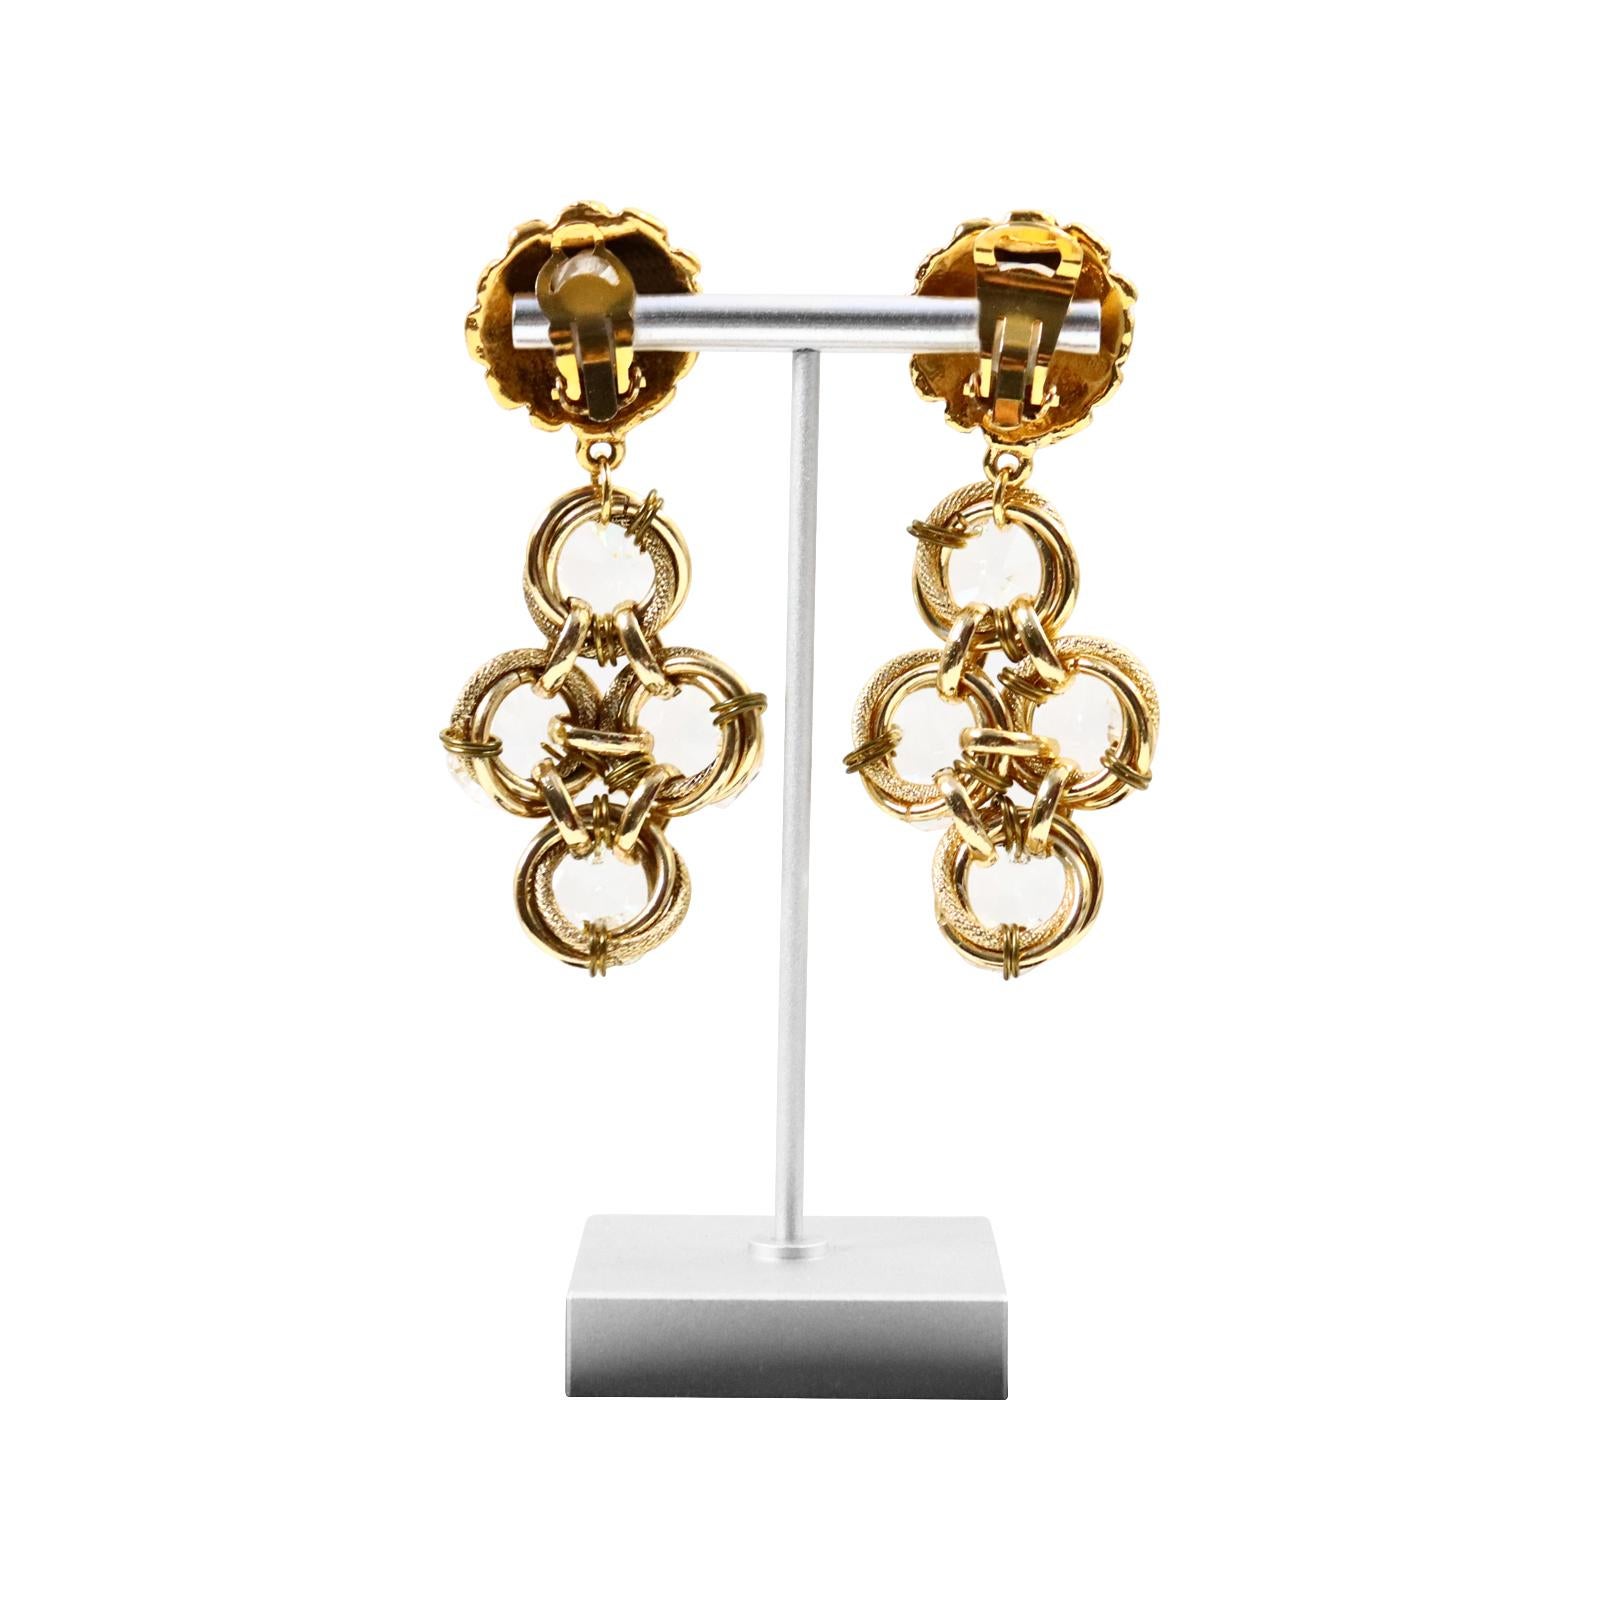 Vintage Poggi Paris Gold Tone with Large Crystals Dangling Earrings, circa 1990s In Good Condition For Sale In New York, NY